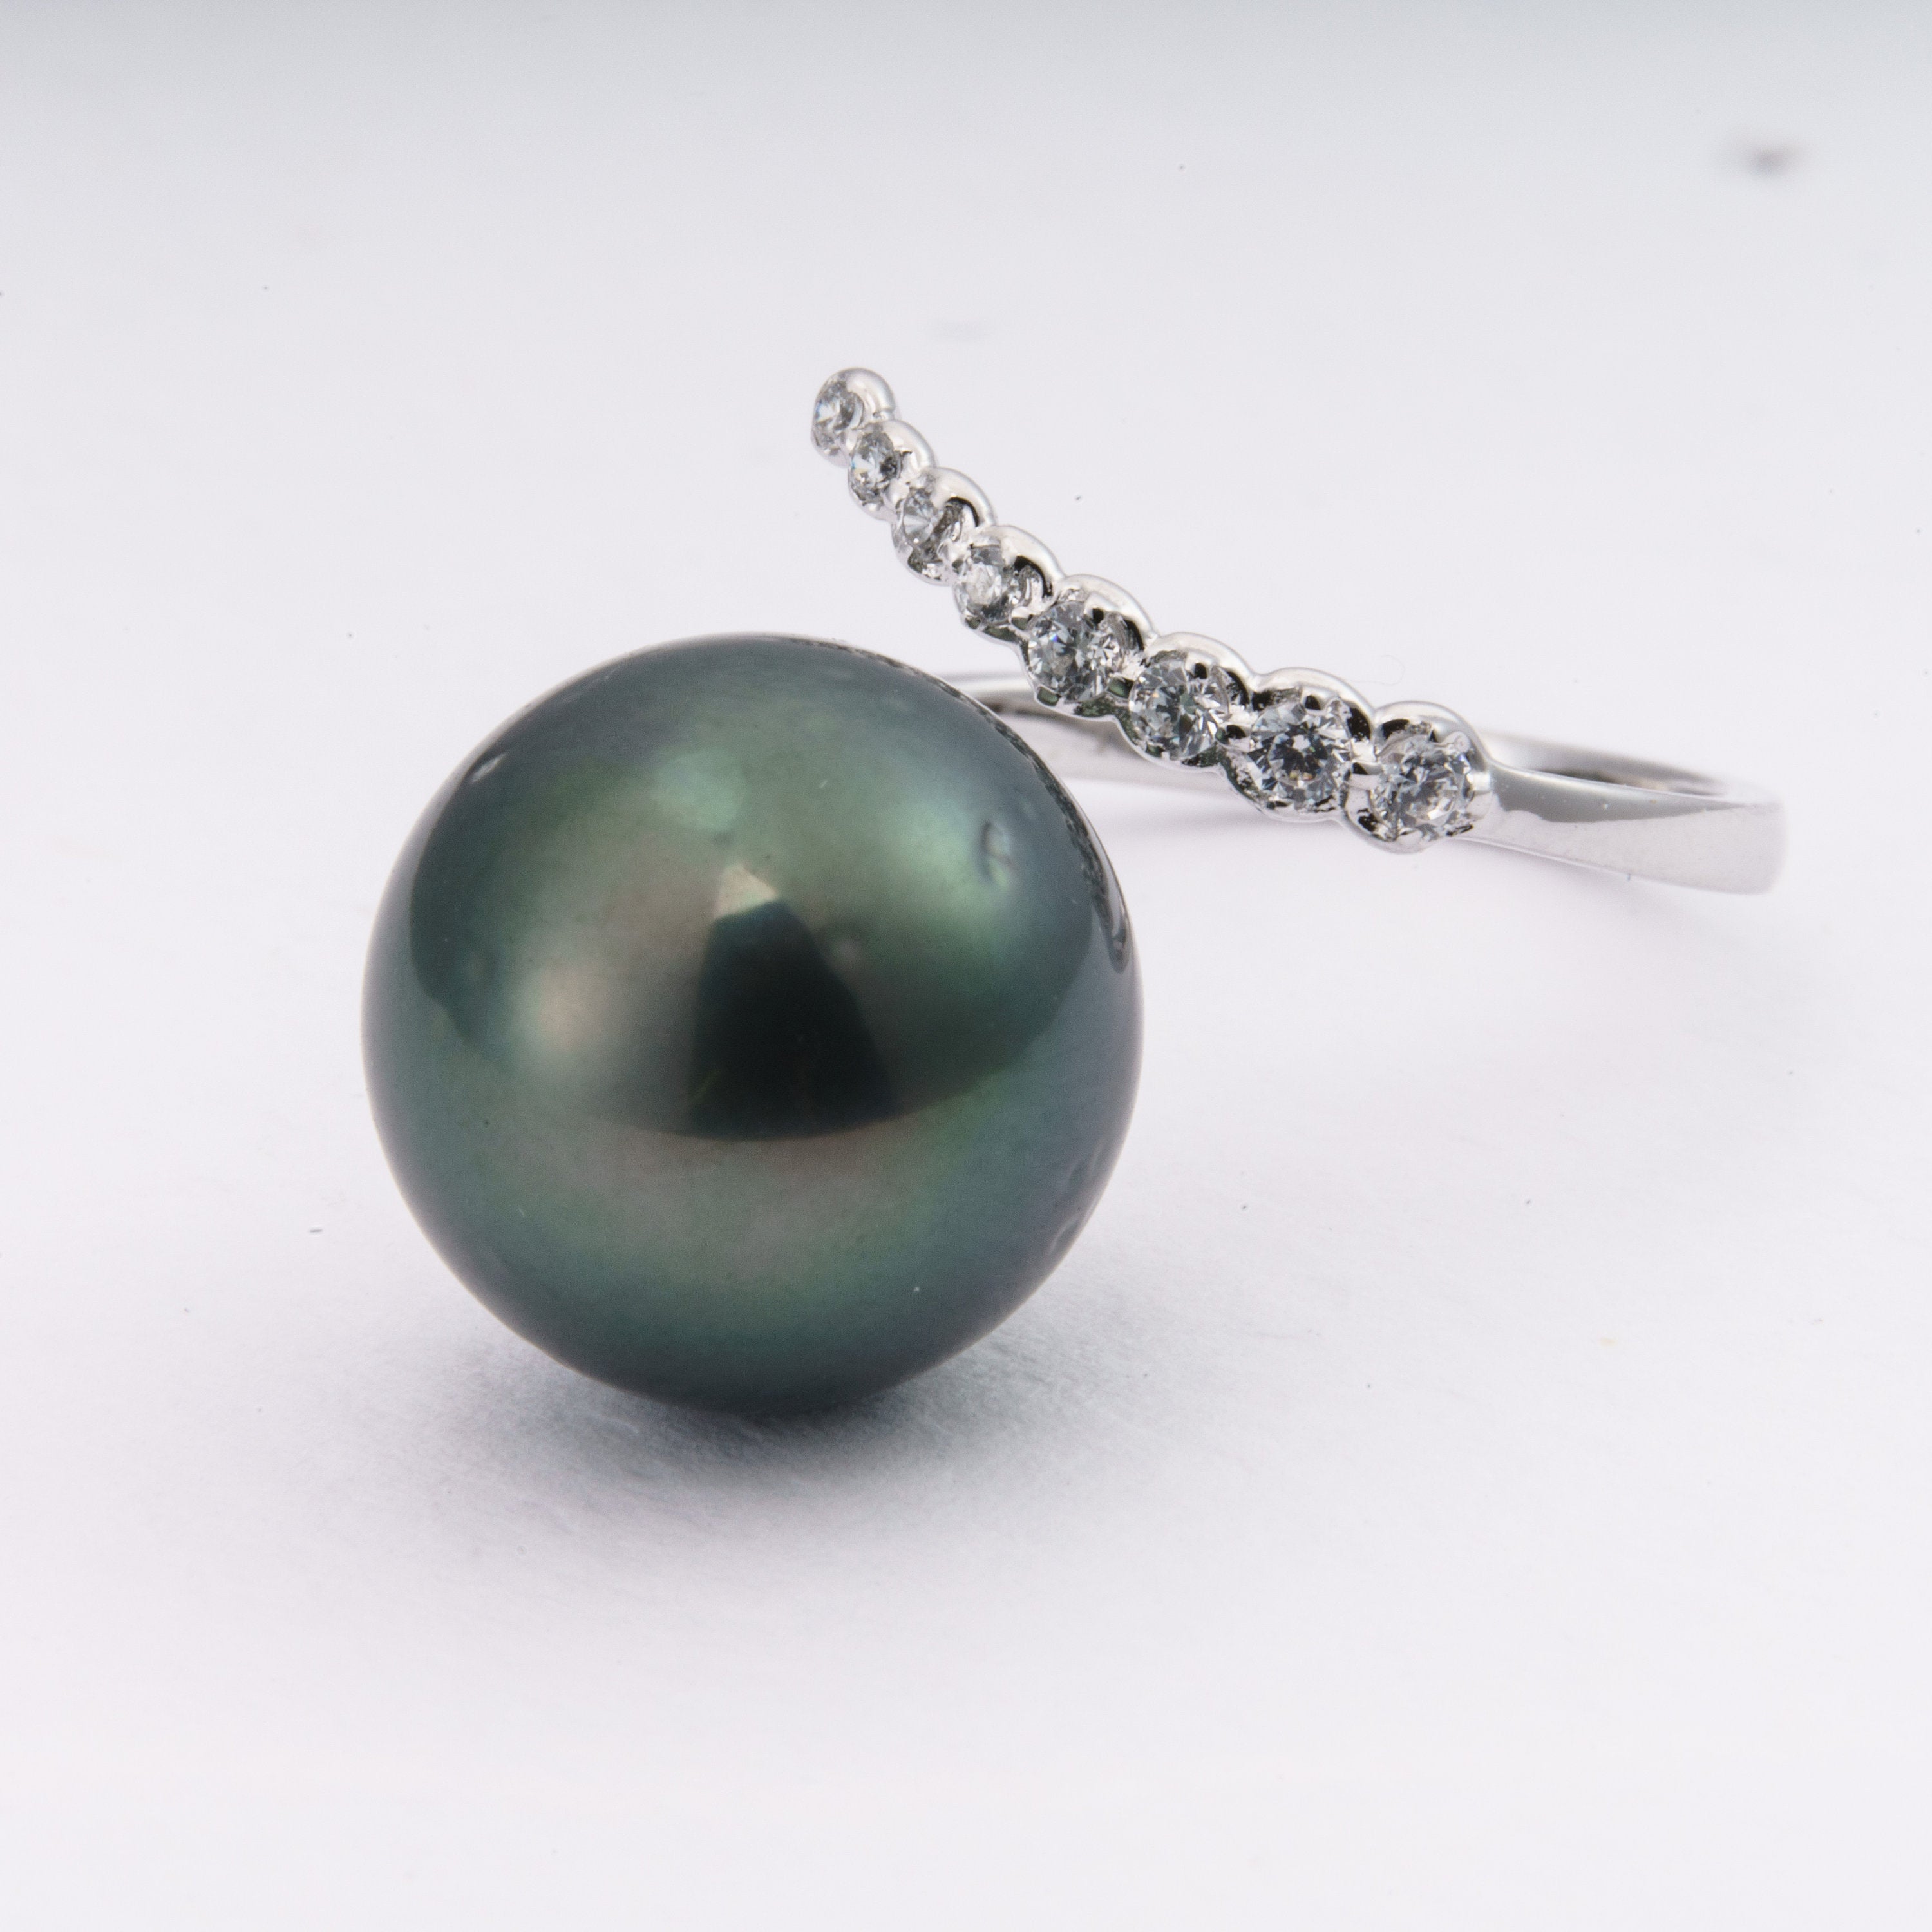 13mm tahitian pearl ring, size 5.5 us, 925 sterling silver with cubic zirconia